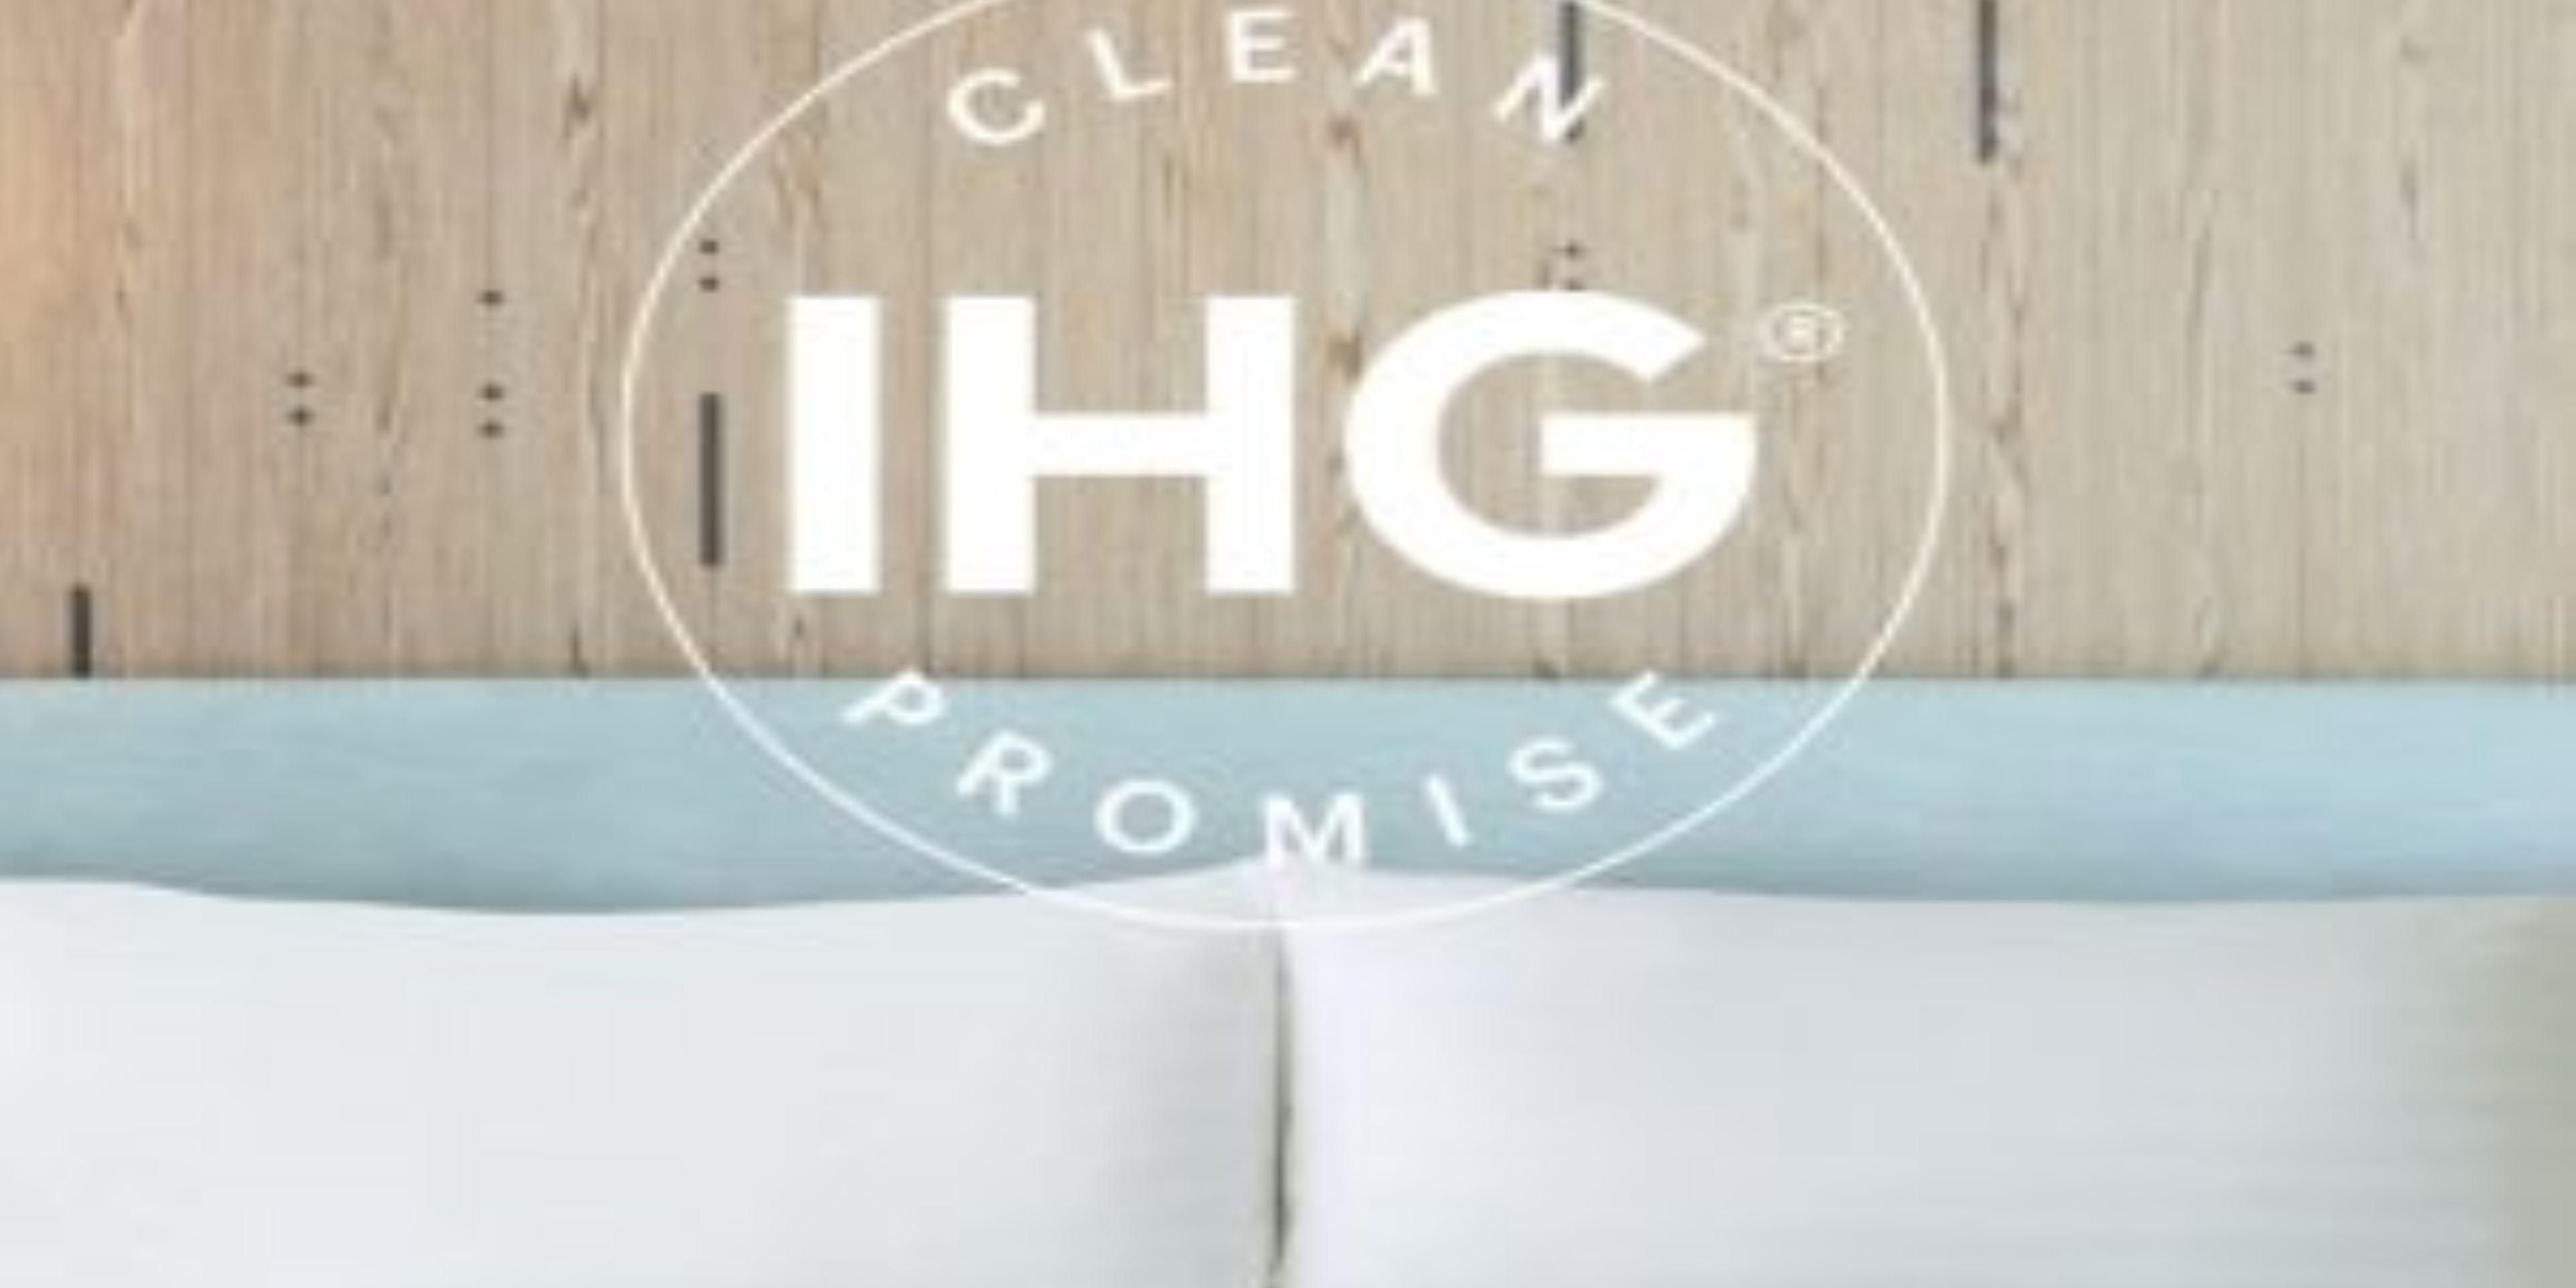 As the world adjusts to new travel norms and expectations we are enhancing the experience for its hotel guests around the world, by redefining cleanliness and supporting guests' personal wellbeing throughout their stay. Our hotel is committed to delivering on this promise and confident you will notice the difference!